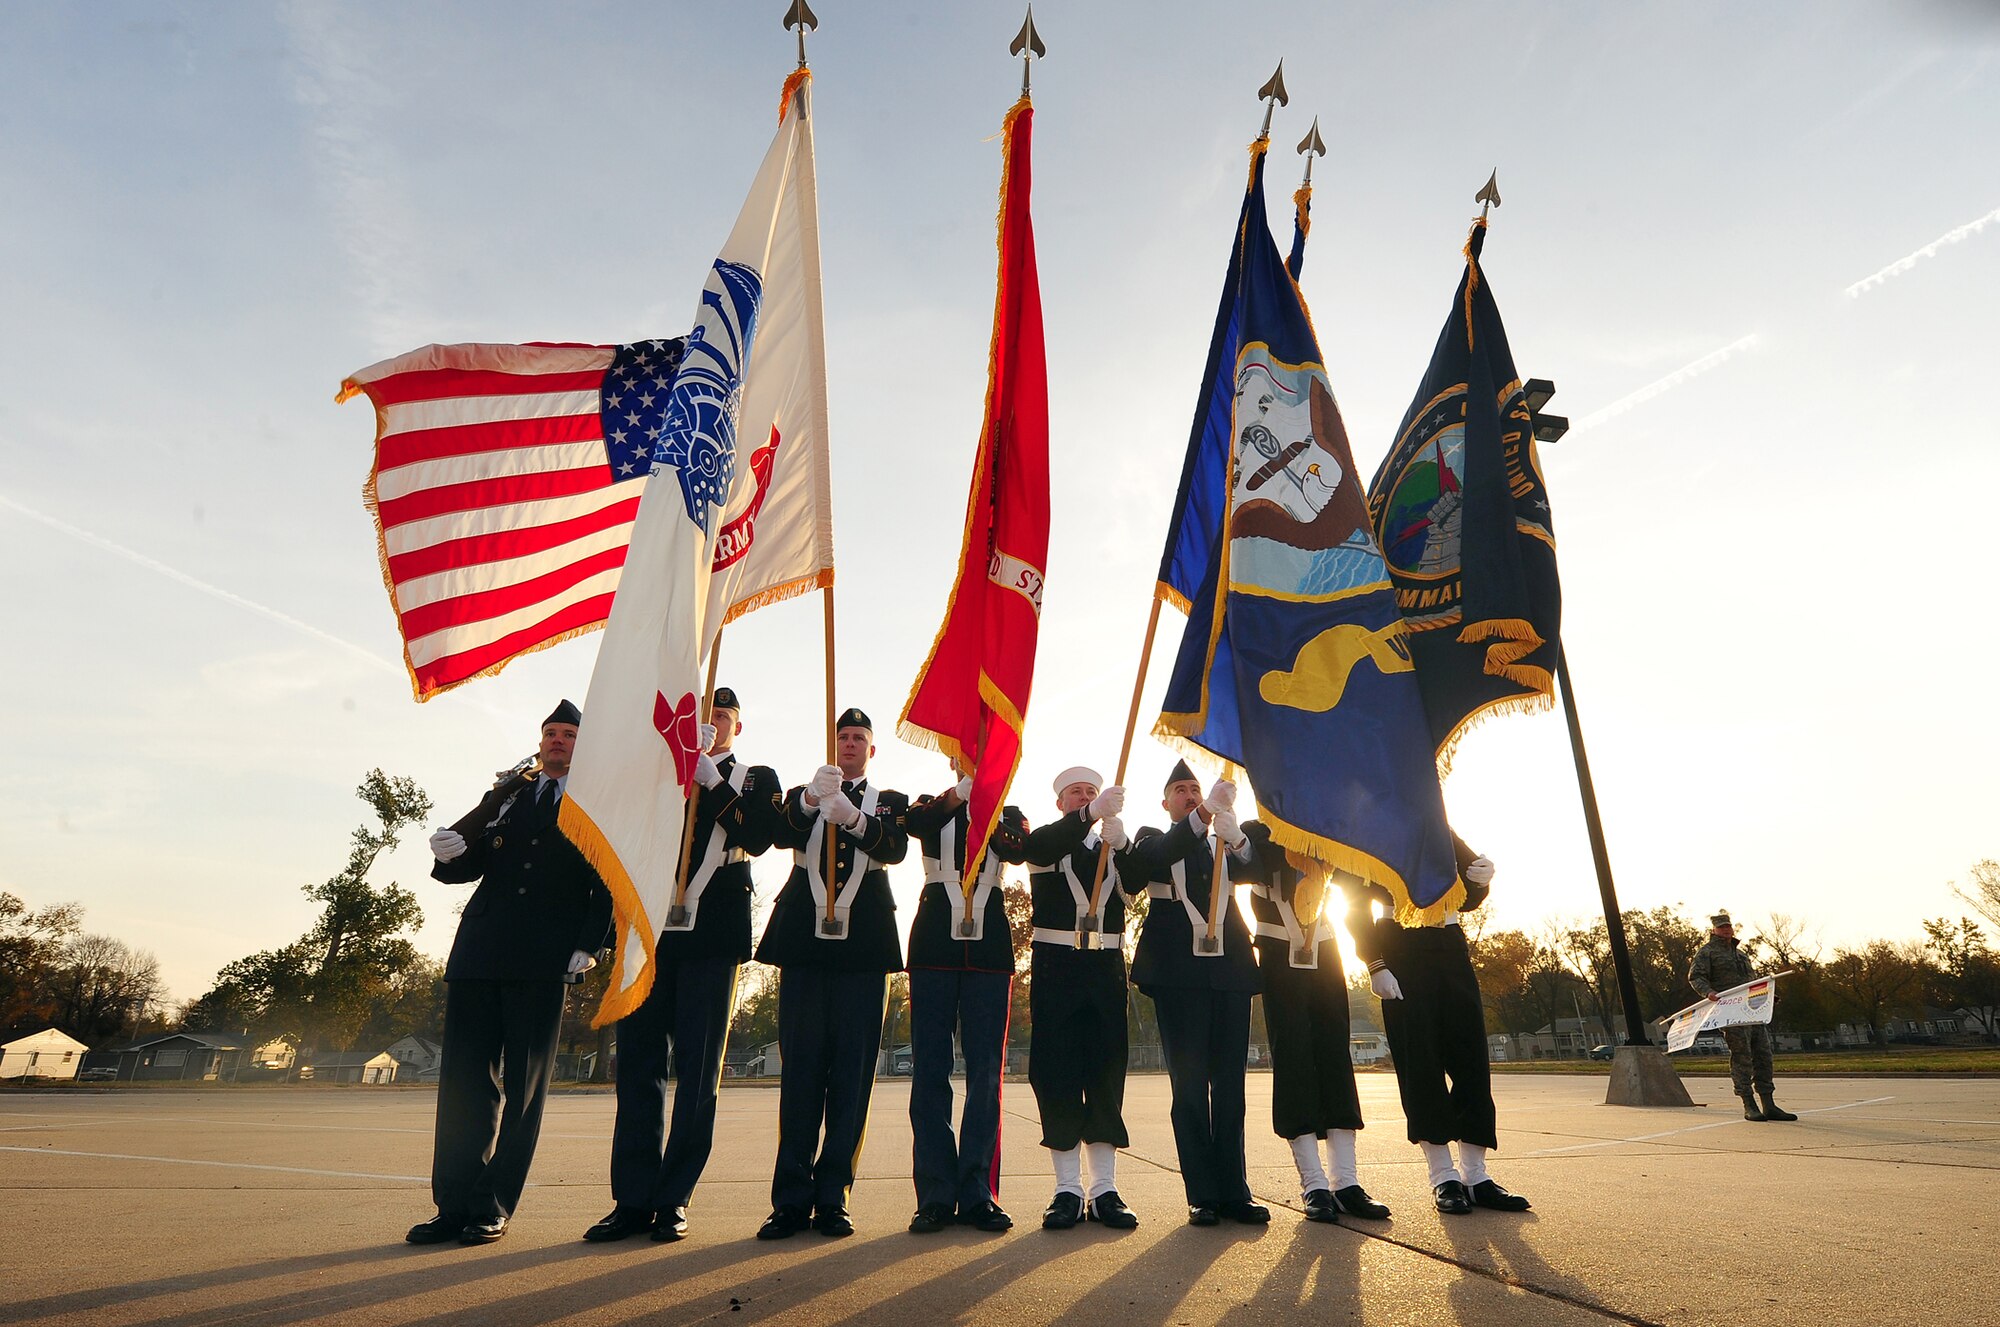 The U.S. Strategic Command’s honor guard posts the colors prior to leading members of team Offutt and tenant units in the 2011 Veterans Day parade held on Mission Avenue in Bellevue, Neb.